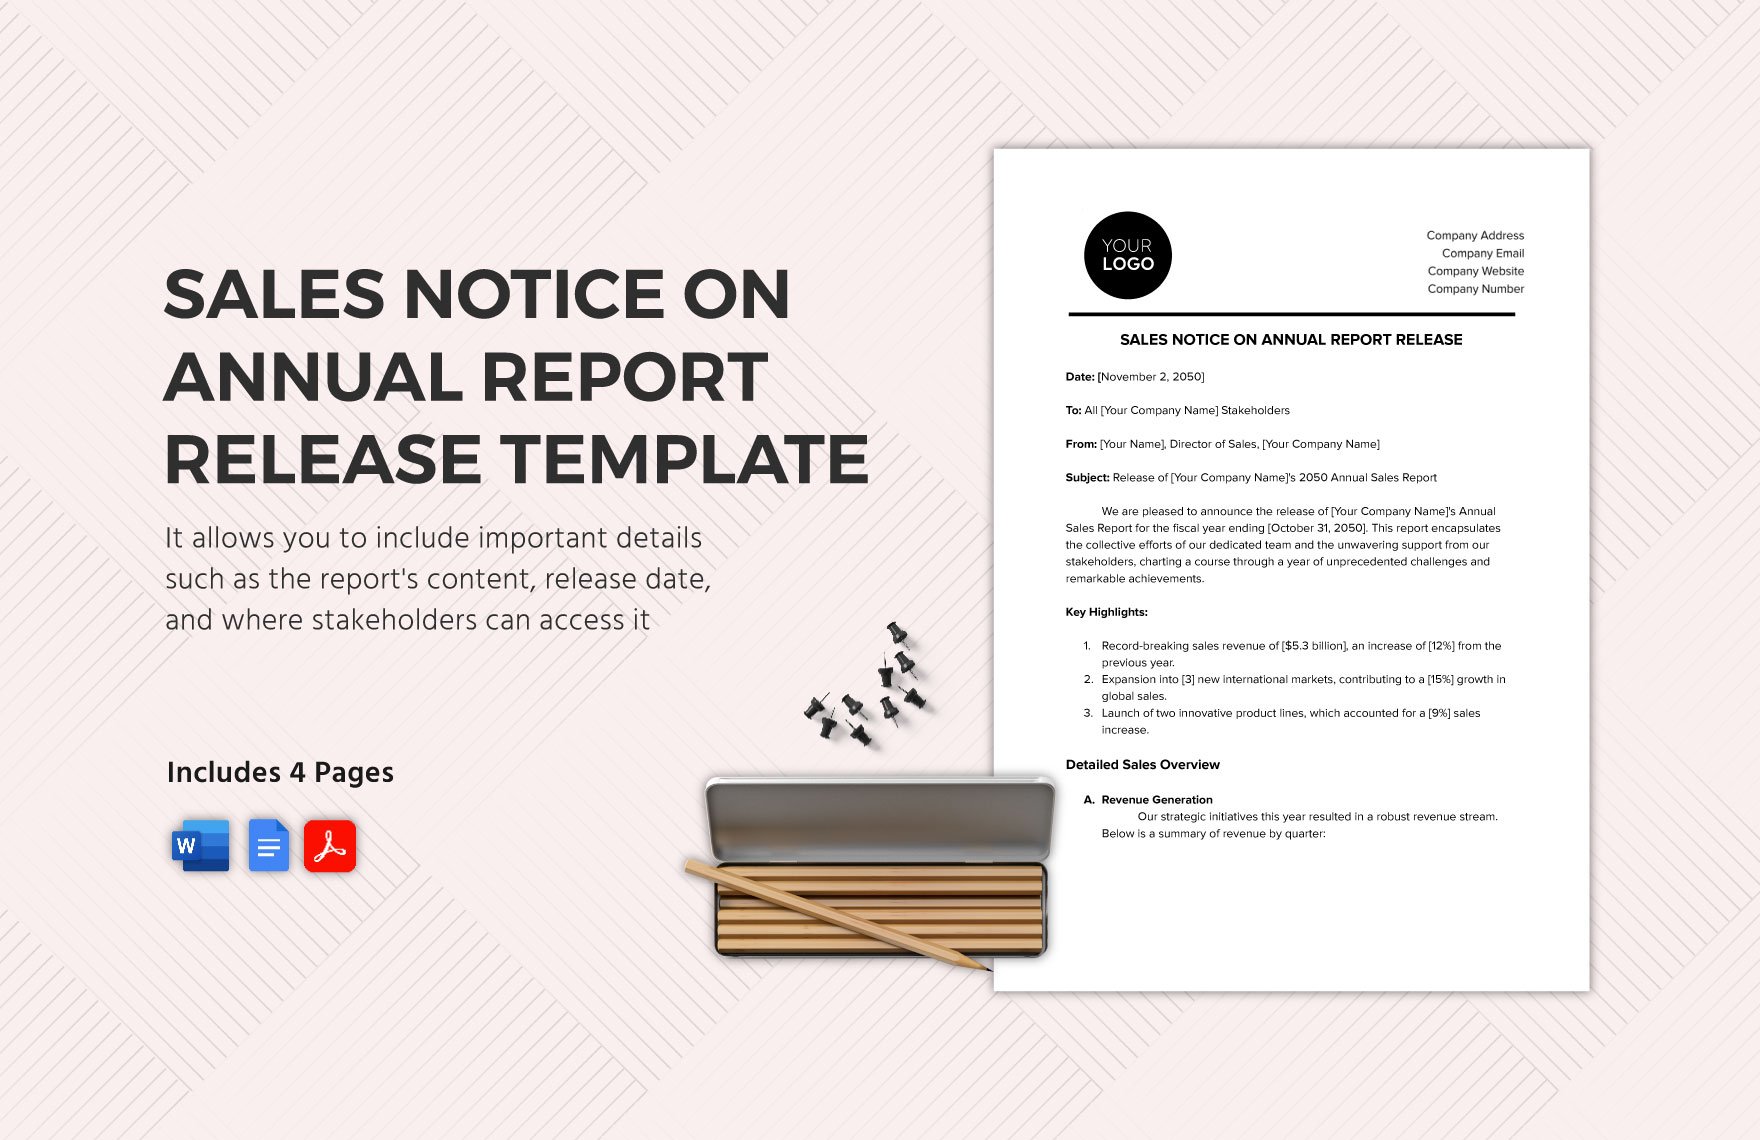 Sales Notice on Annual Report Release Template in Word, Google Docs, PDF